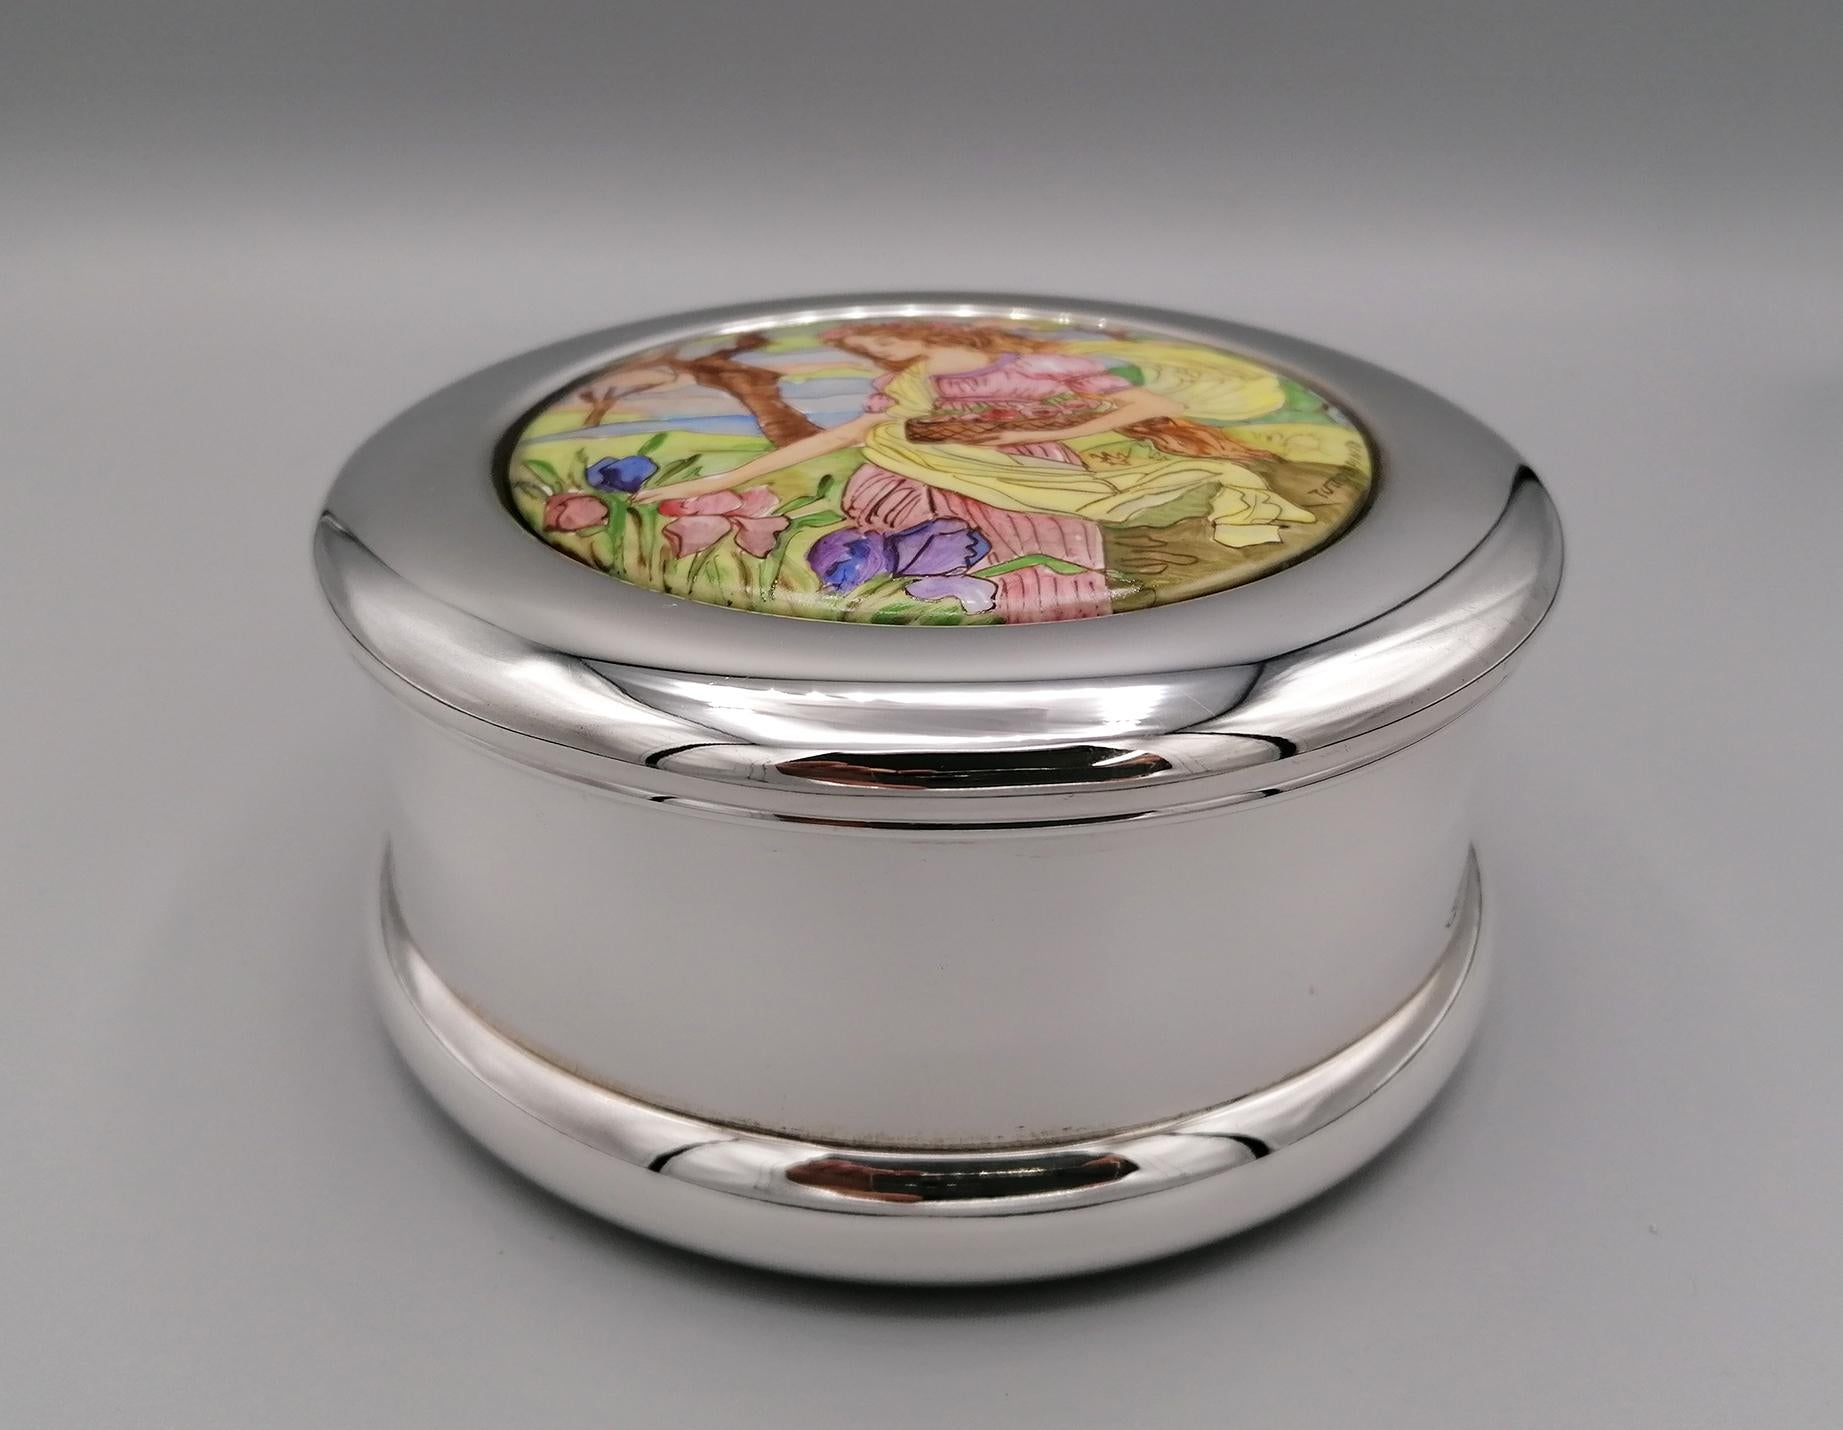 Smooth round 925 sterling silver box.
The lid was modeled to be able to apply a Limoges porcelain, subsequently hand painted in polychrome with a female figure picking flowers.
On the porcelain there is an inscription in Italian that says:
TUTTO